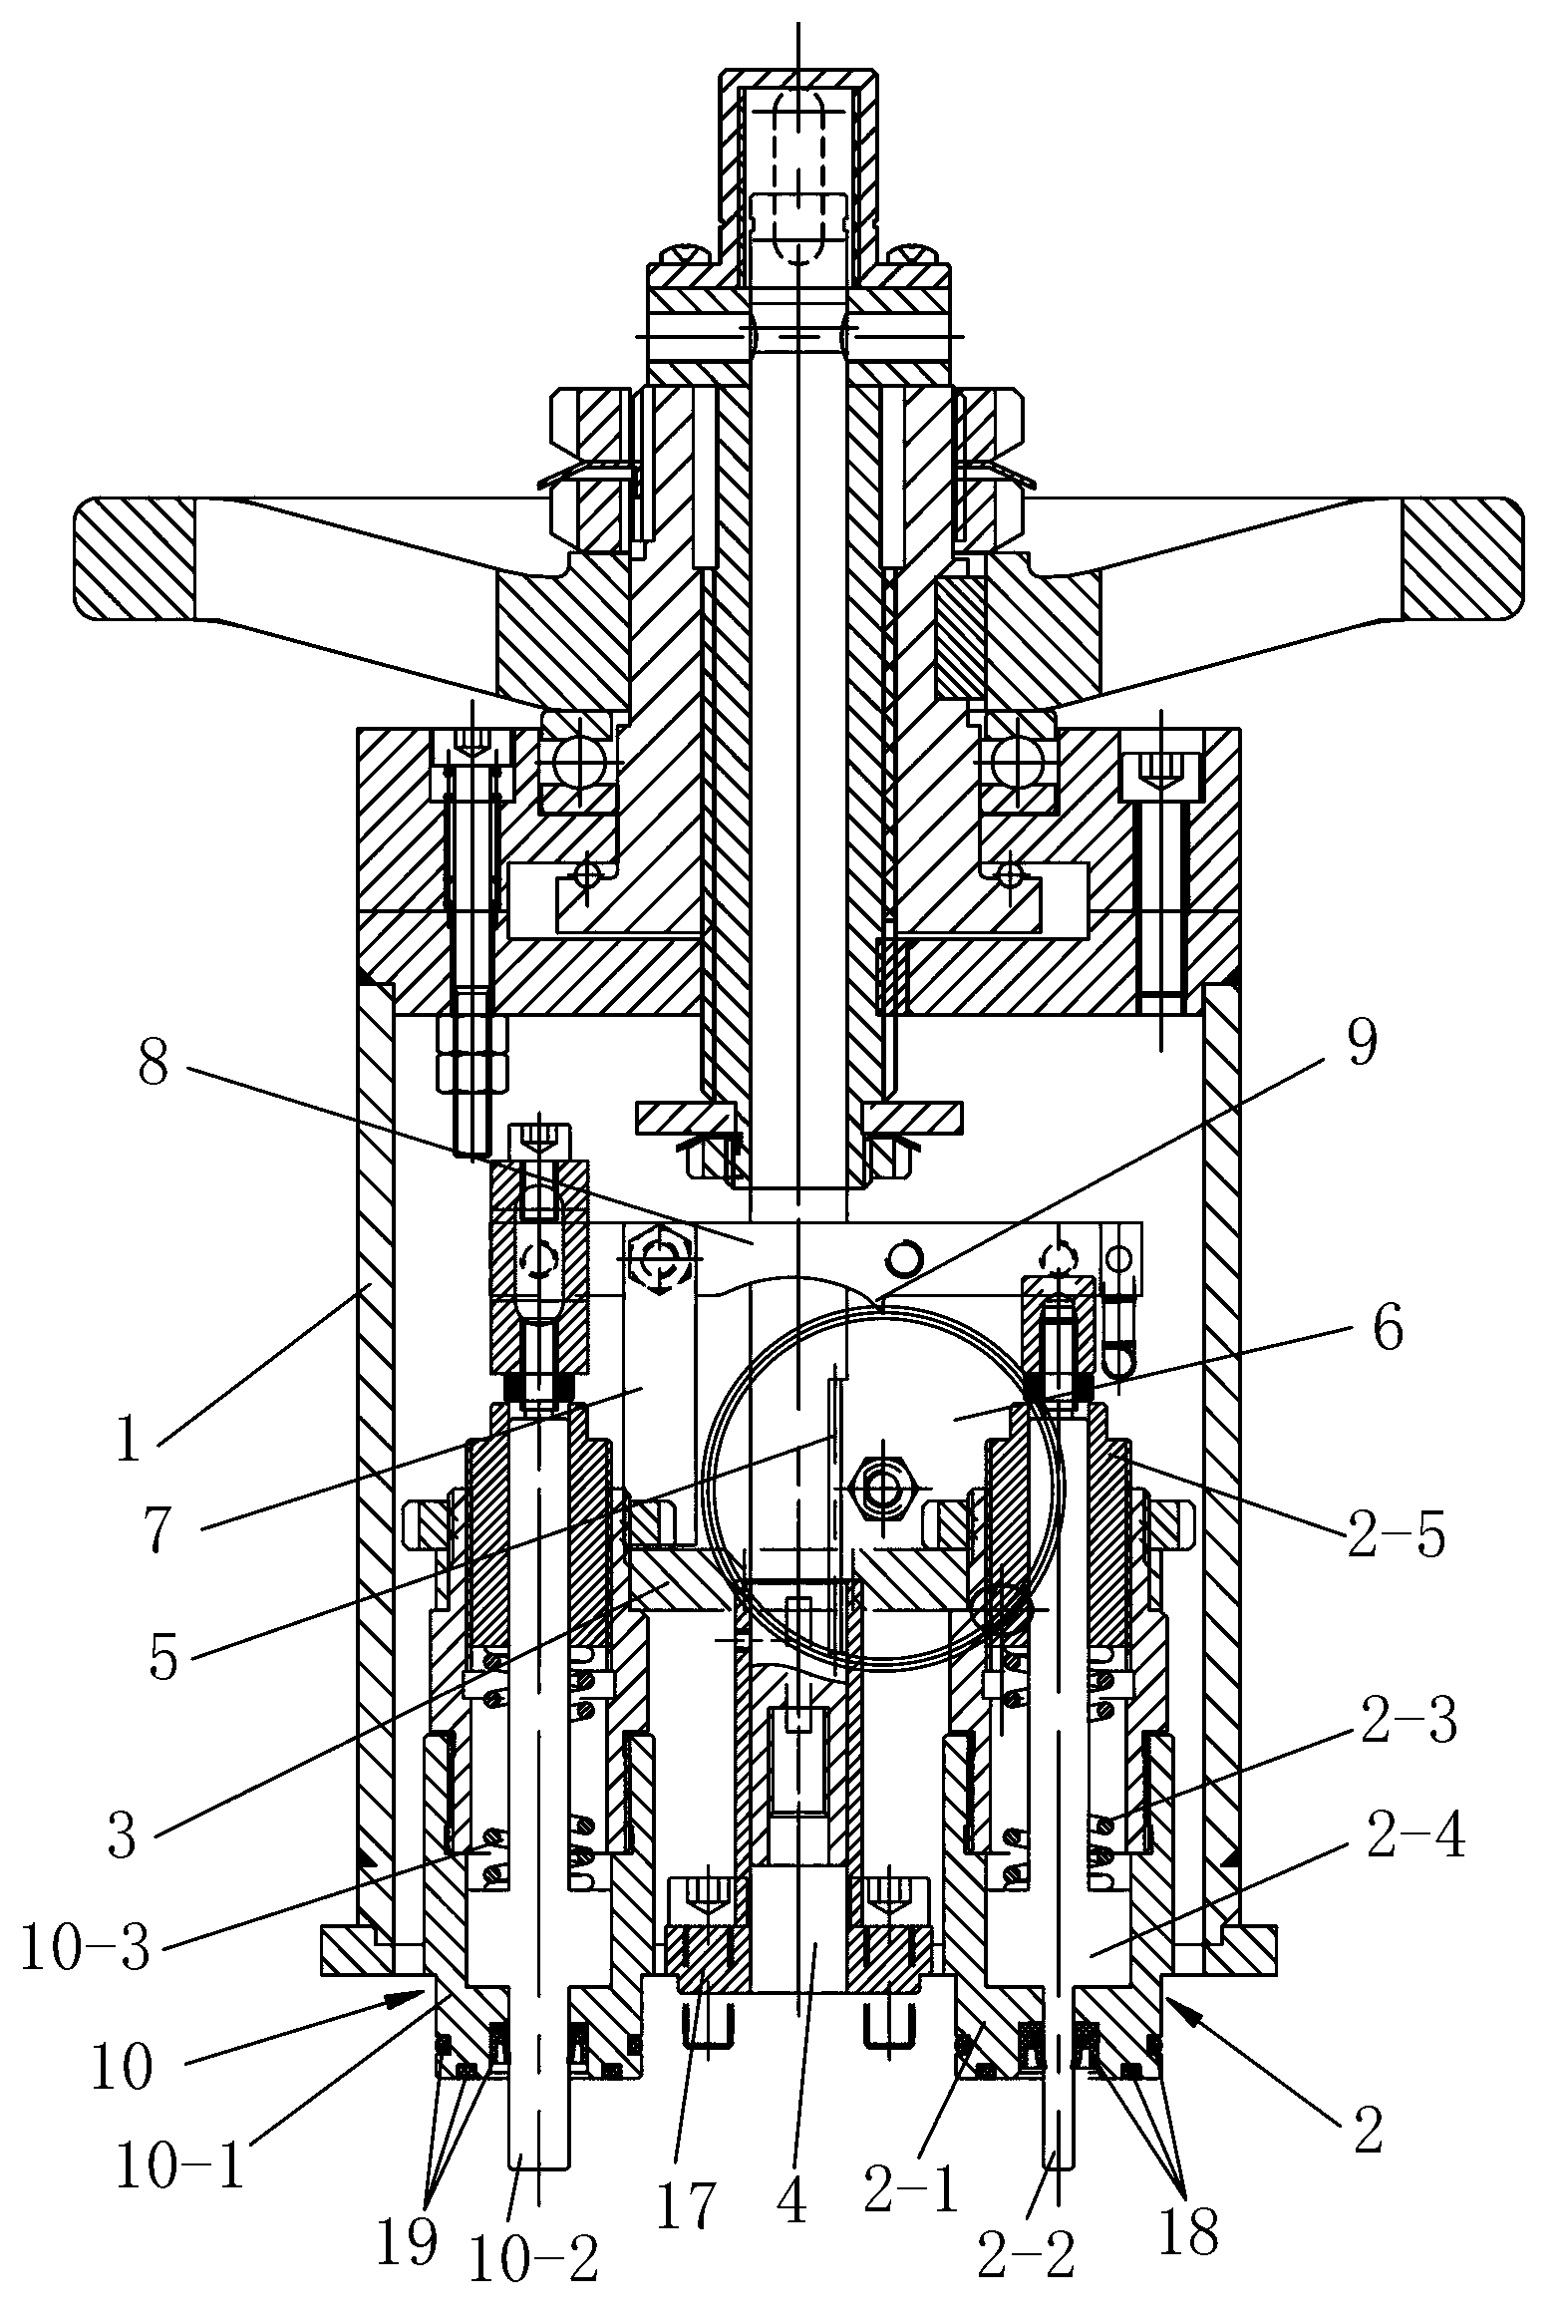 Pilot-operated type solenoid valve for gas well wellhead and valve plug lifting mechanism